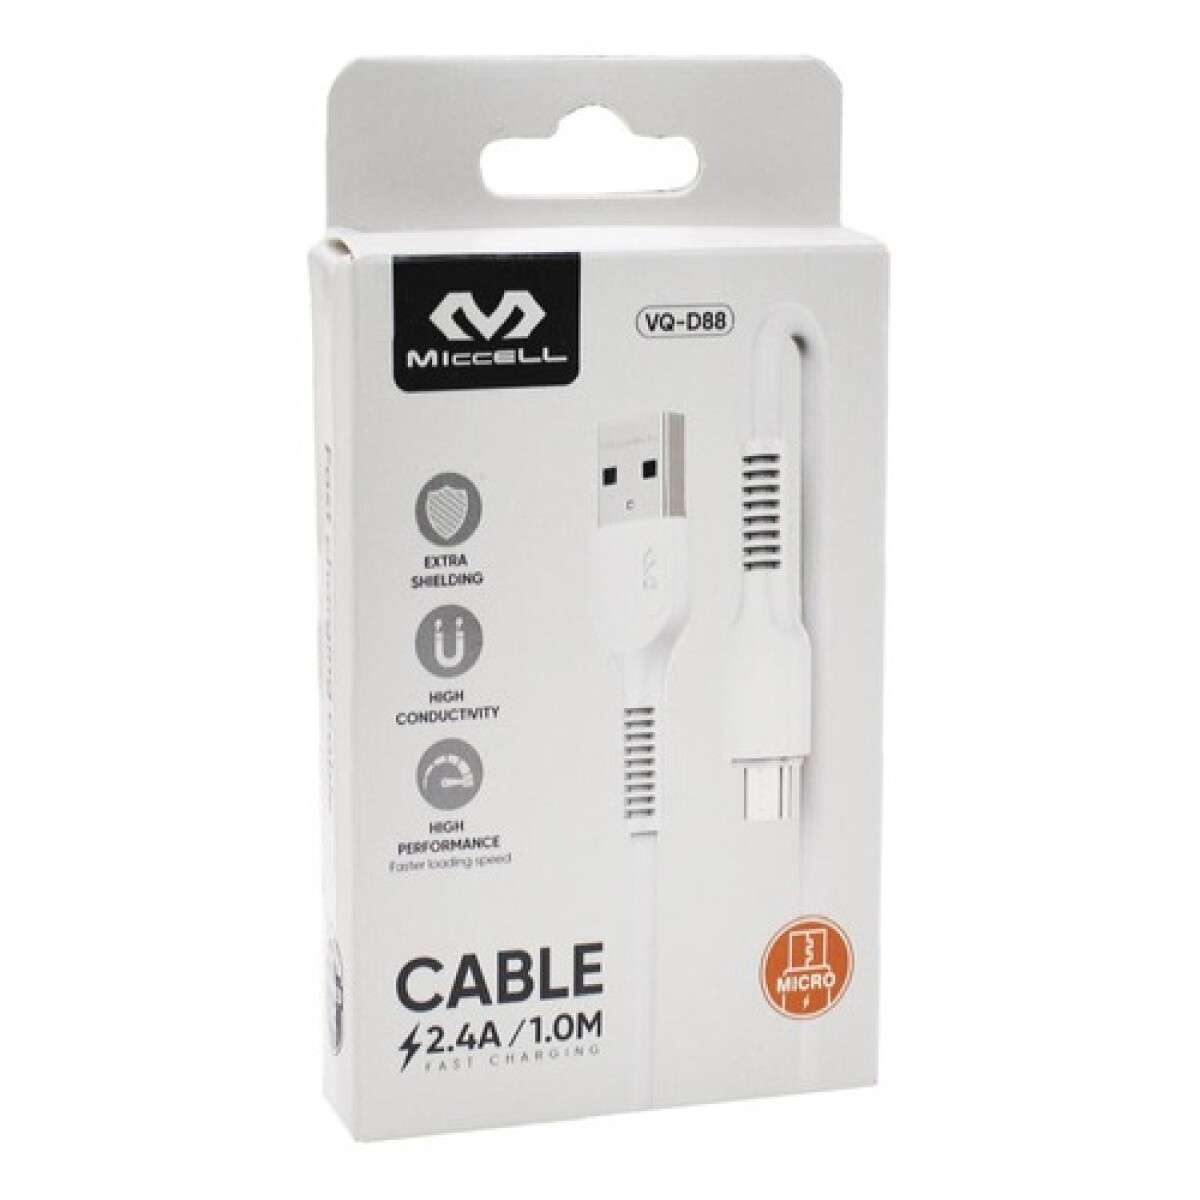 Cable micro USB Miccell 2.4A 1.0M - Blanco 